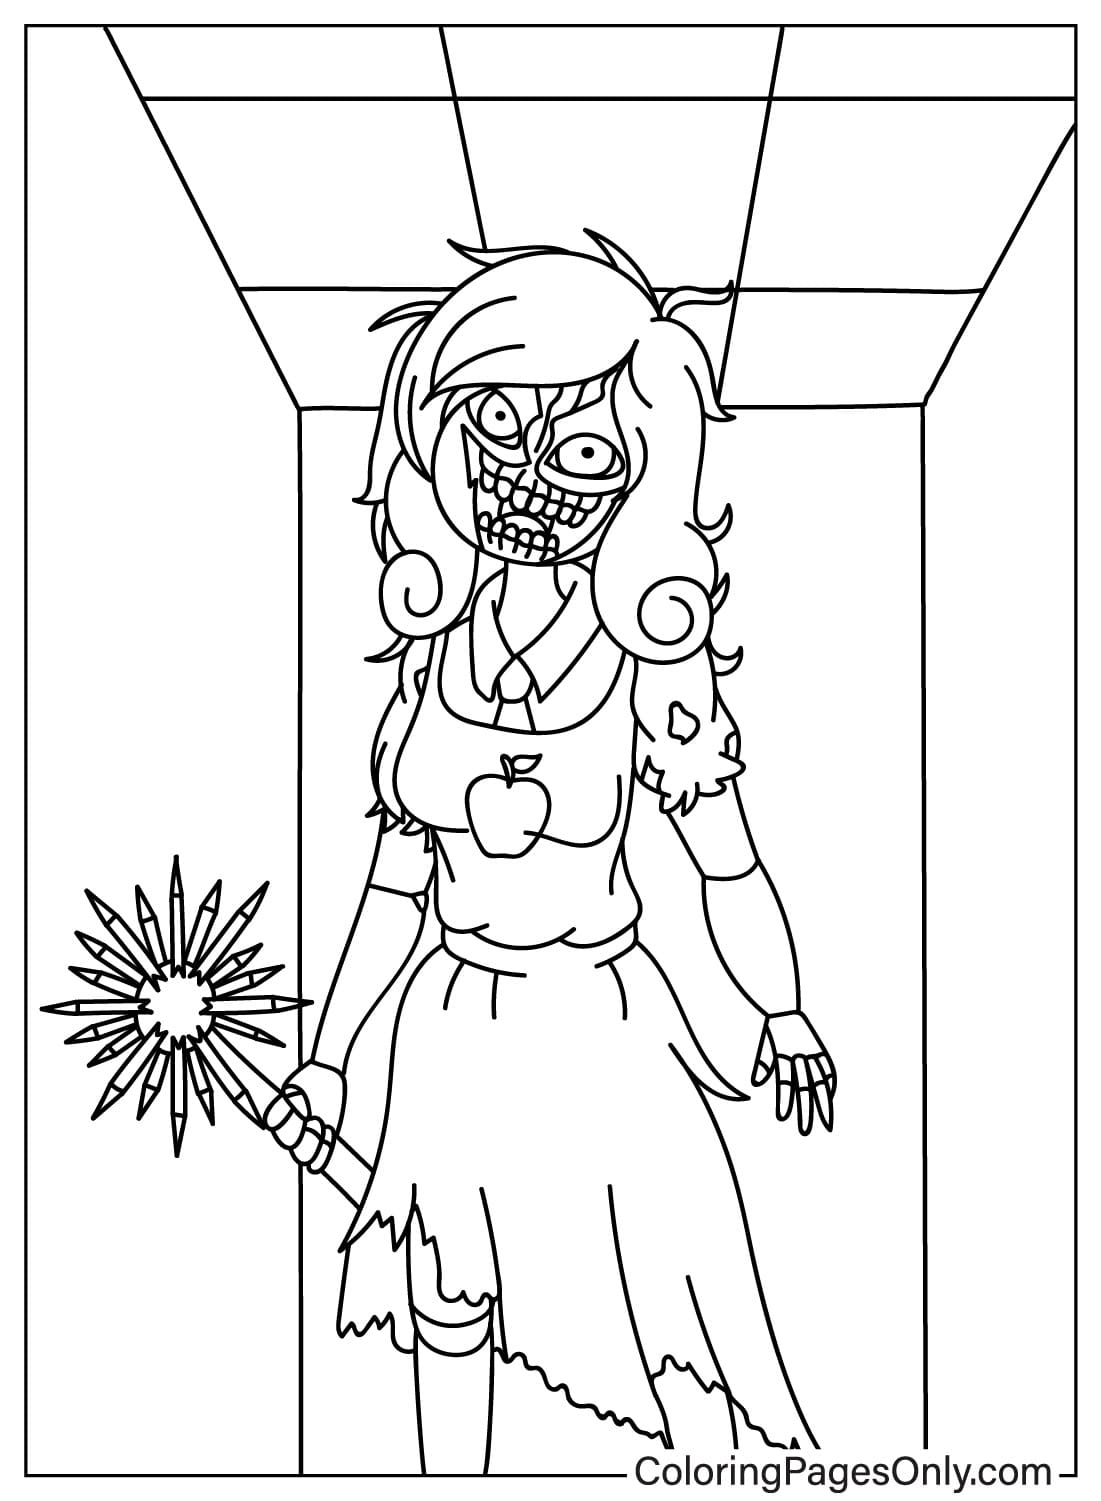 Miss Delight Coloring Page Free Printable Coloring Page